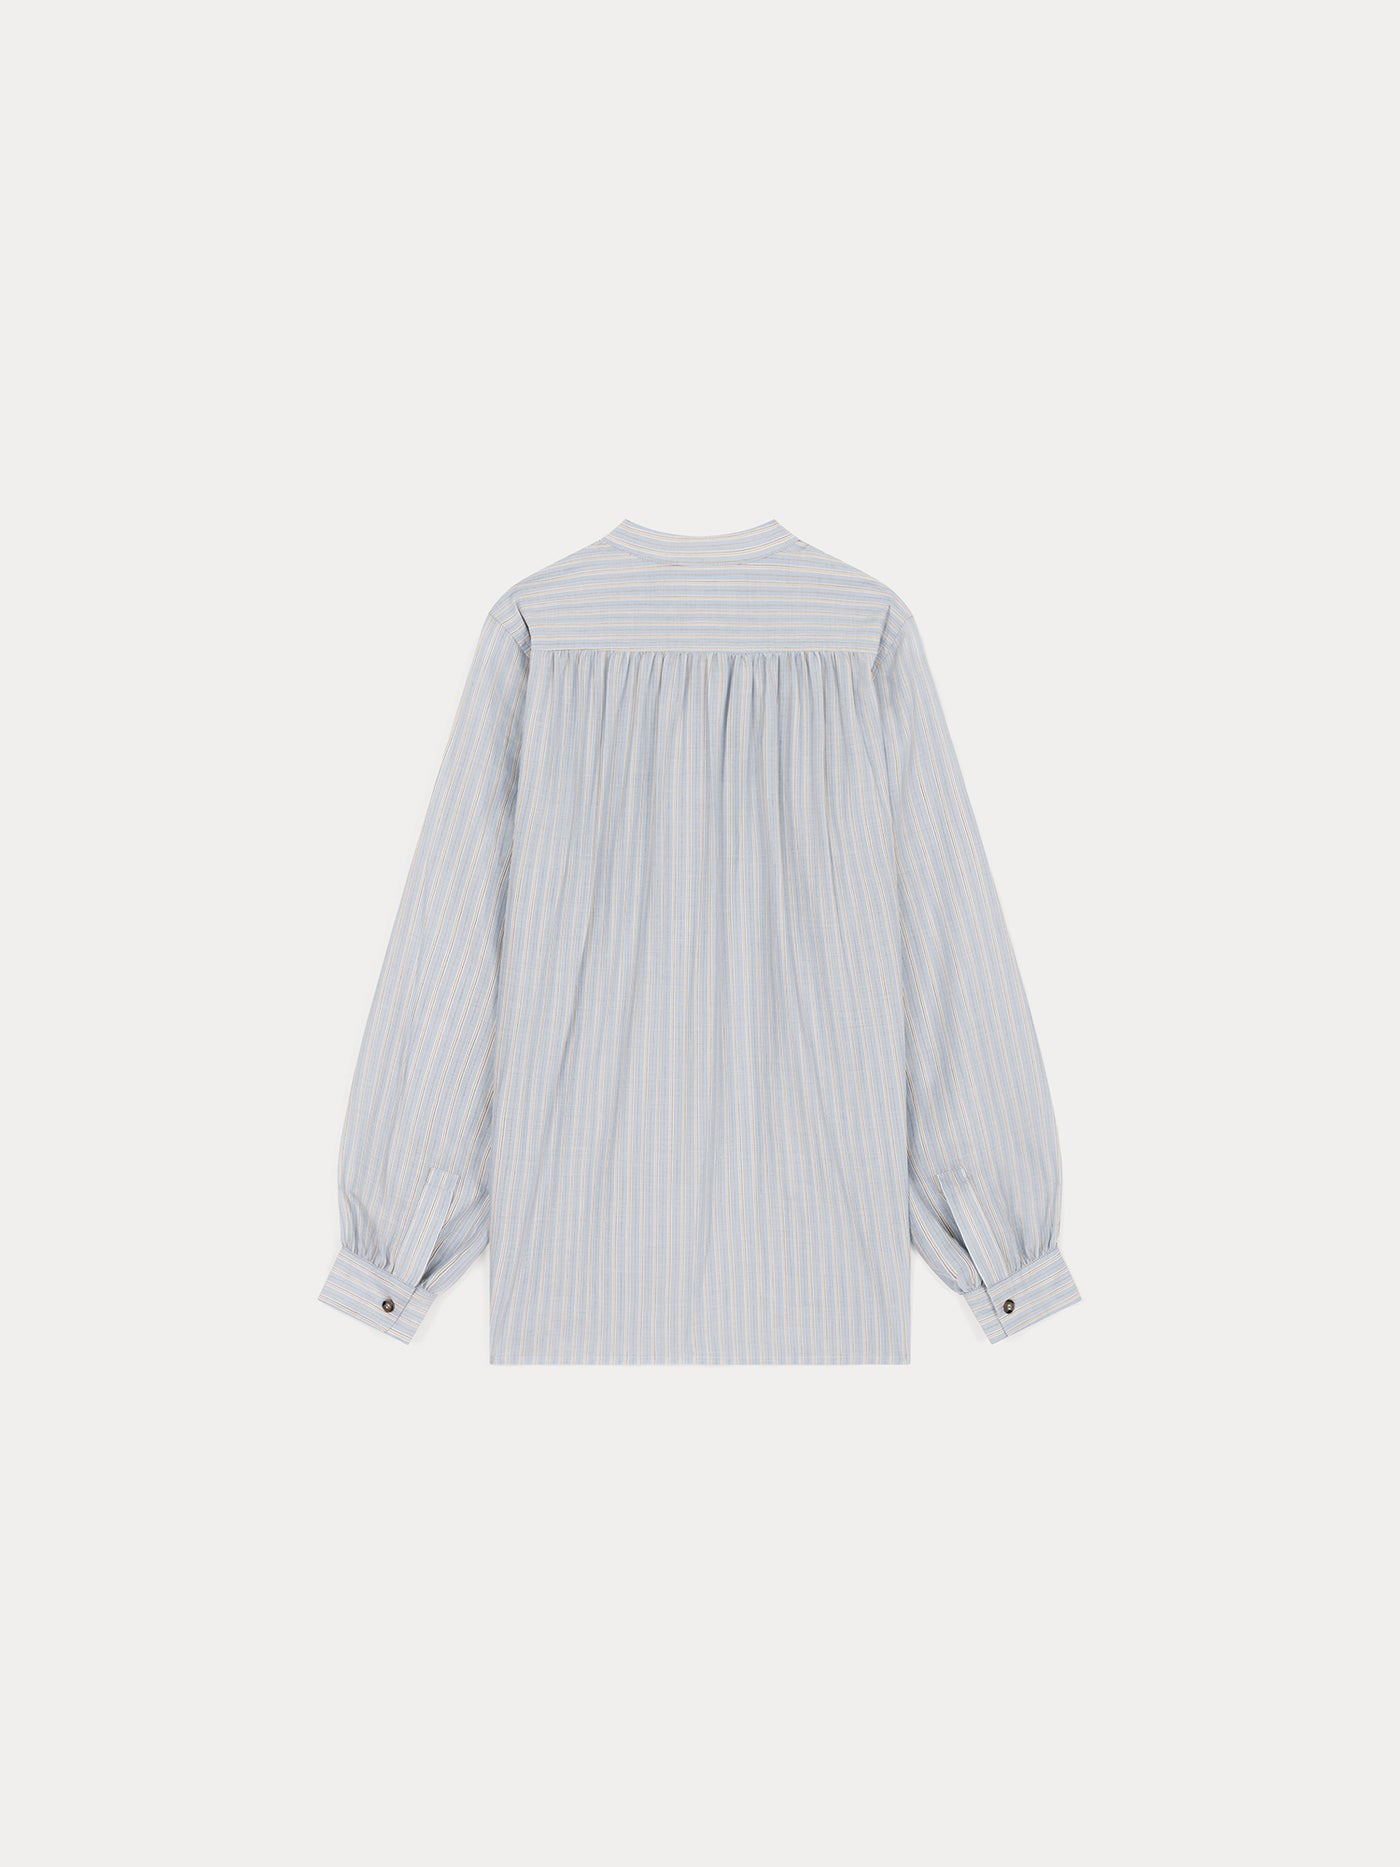 Sky blue striped shirt in cotton